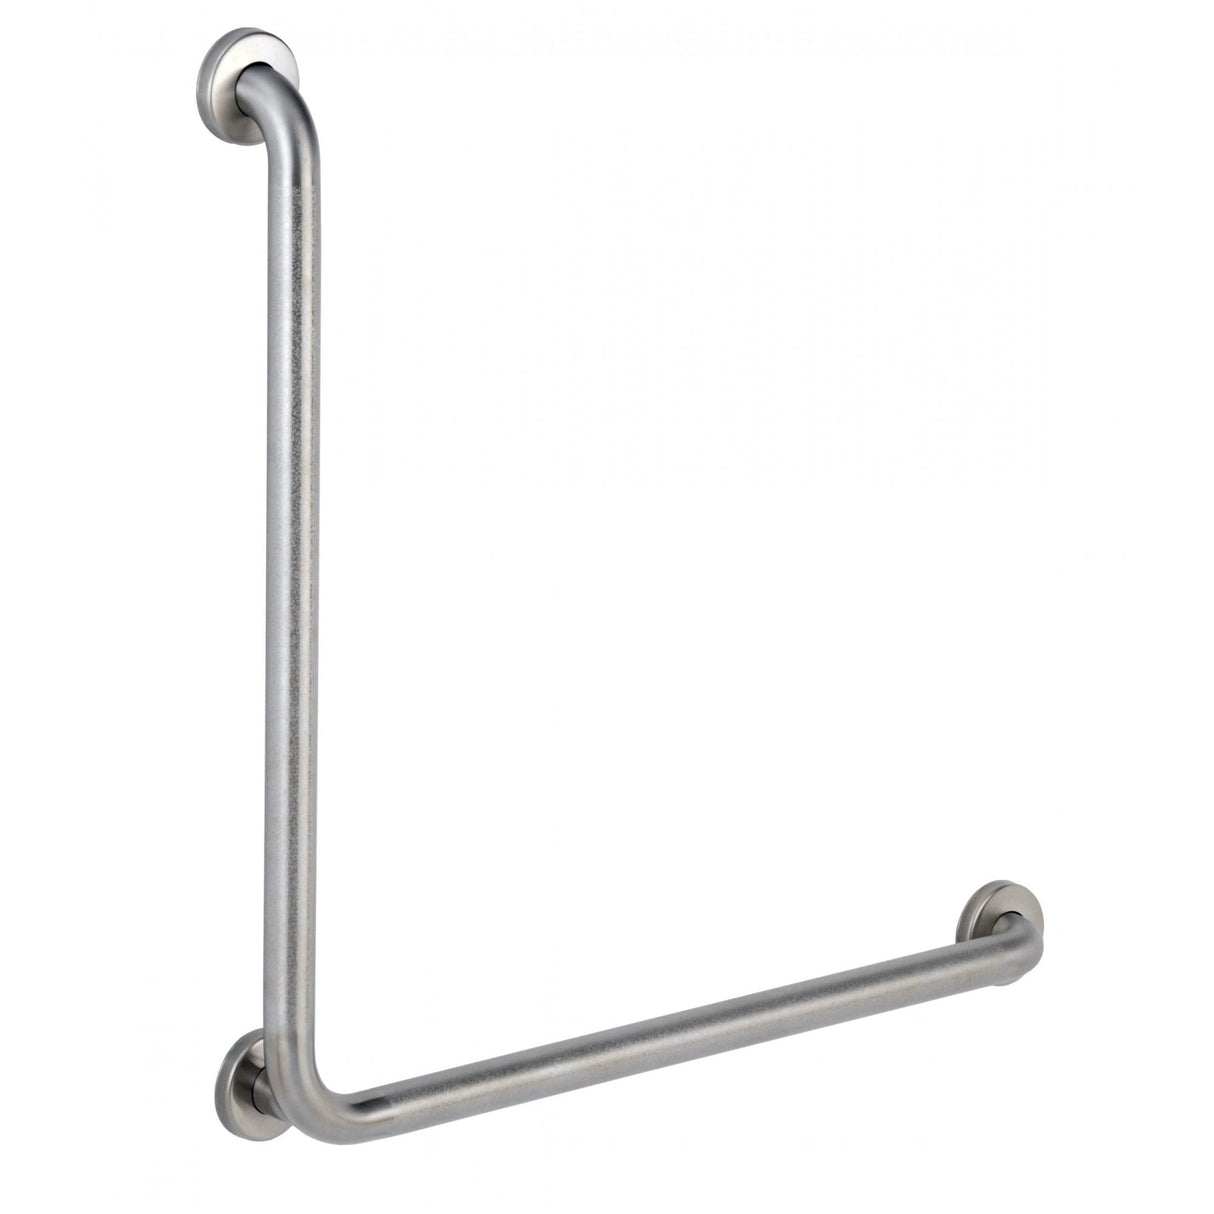 B-6898.99 38mm Diameter L-Shaped AISI 304 Stainless Steel with Peened Grip Grab Bar